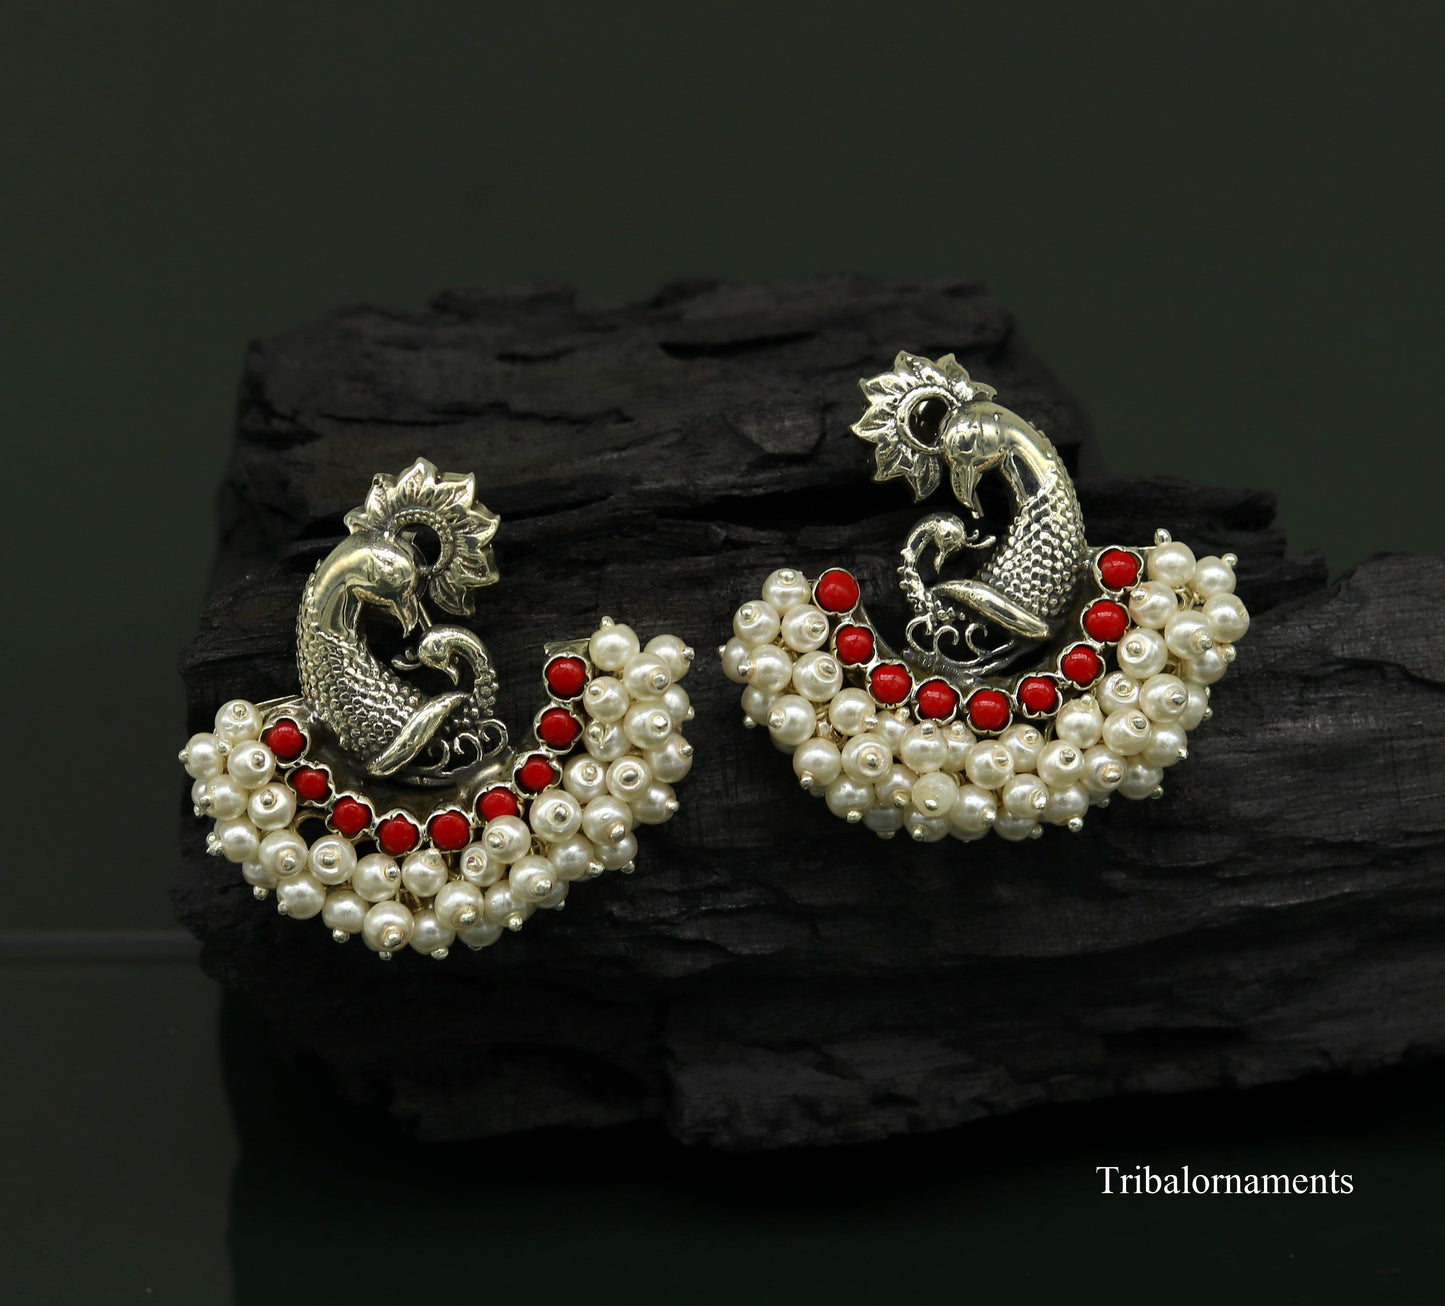 925 sterling silver handmade gorgeous peacock design stud earring with gorgeous red and pearl stone customized earring tribal jewelry s859 - TRIBAL ORNAMENTS